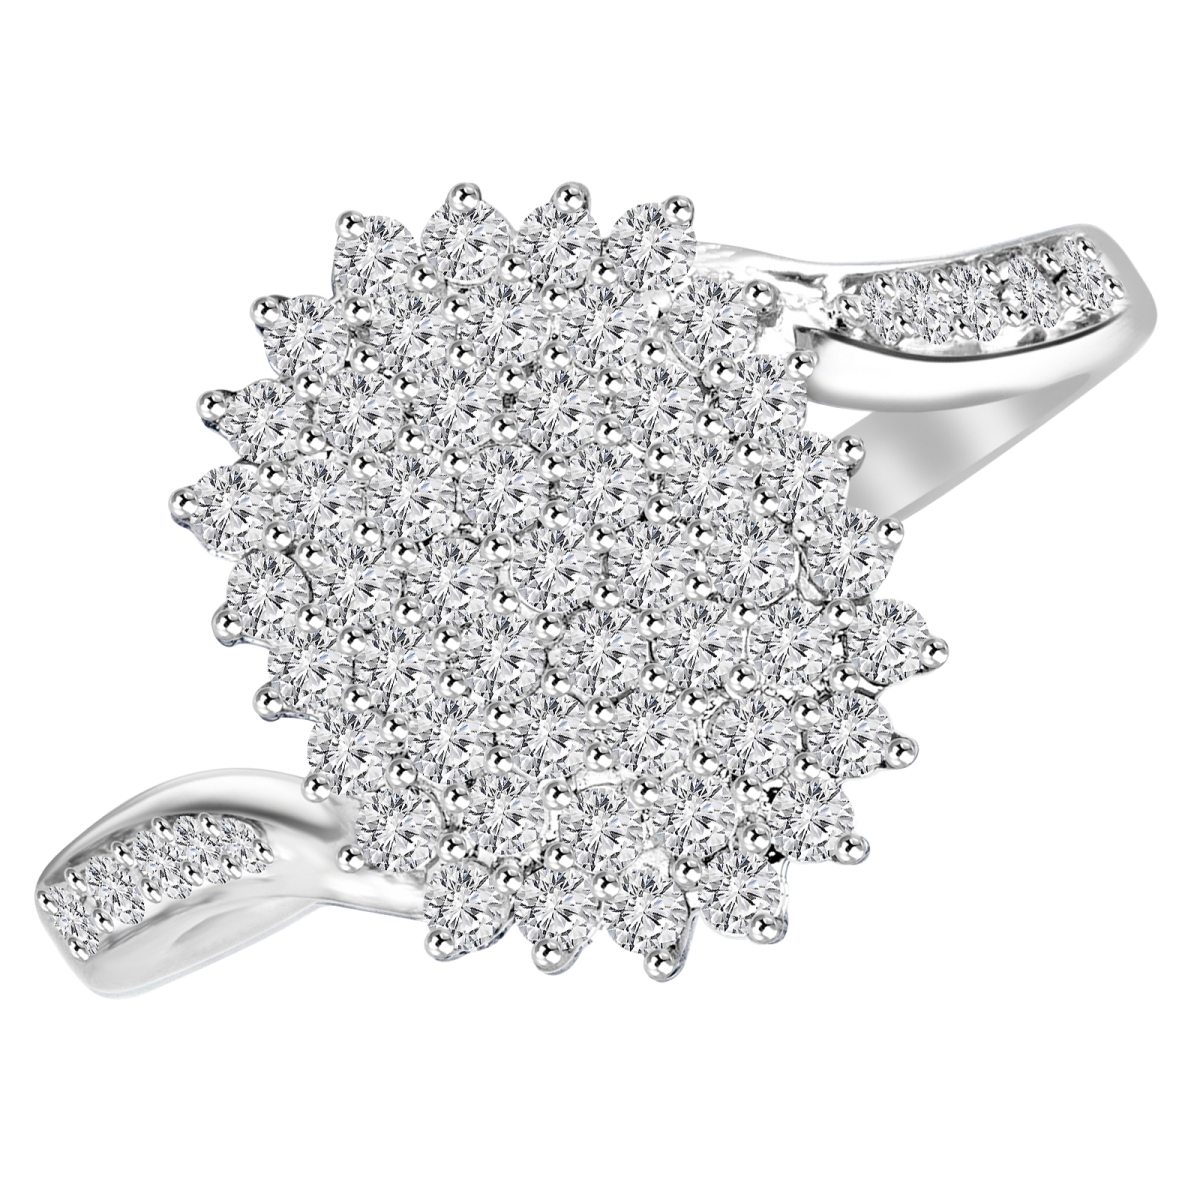 Picture of Majesty Diamonds MDR160007-3.25 0.5 CTW Round Diamond Cluster Cocktail Ring in 14K White Gold - Size 3.25